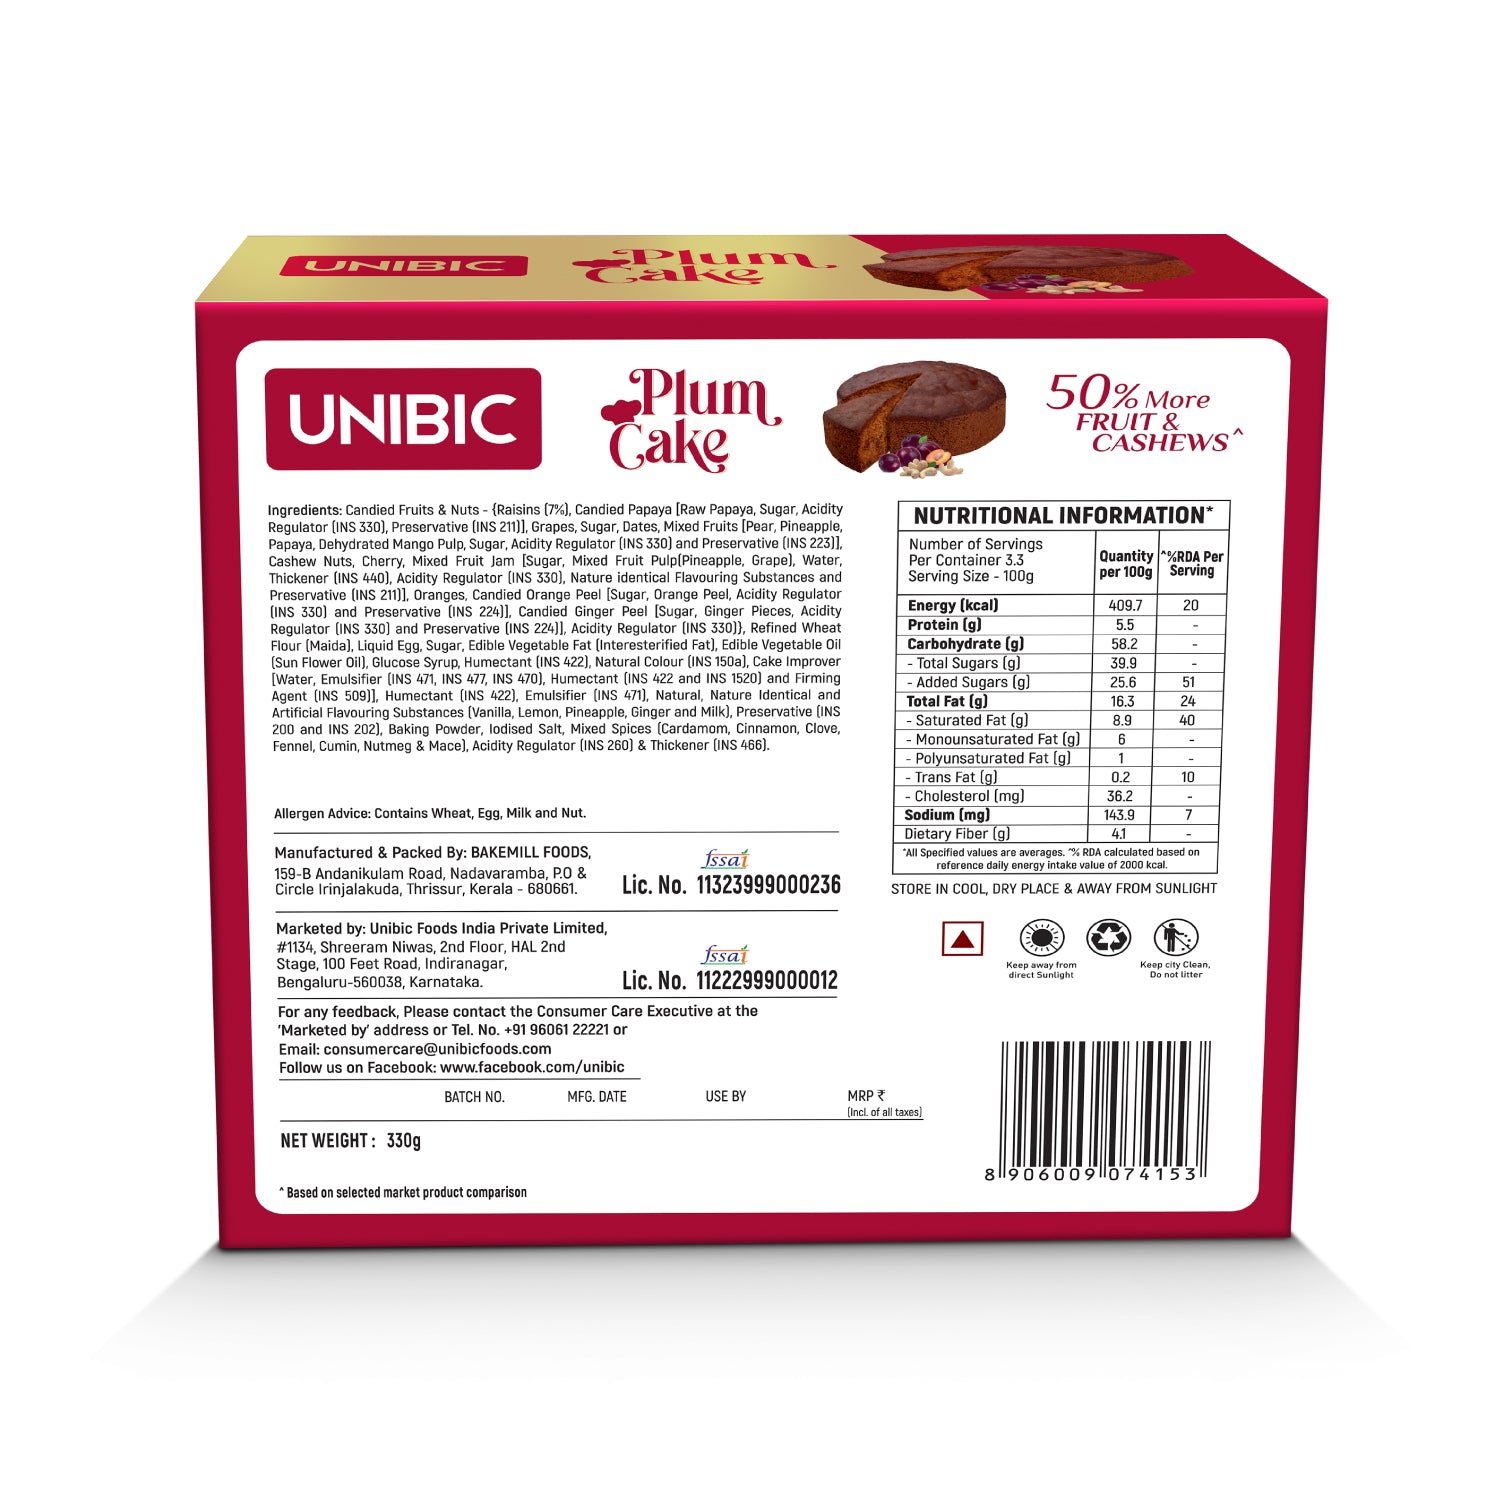 Chocolate Pound Cake 100 grams Nutrition Label - Truthful Food